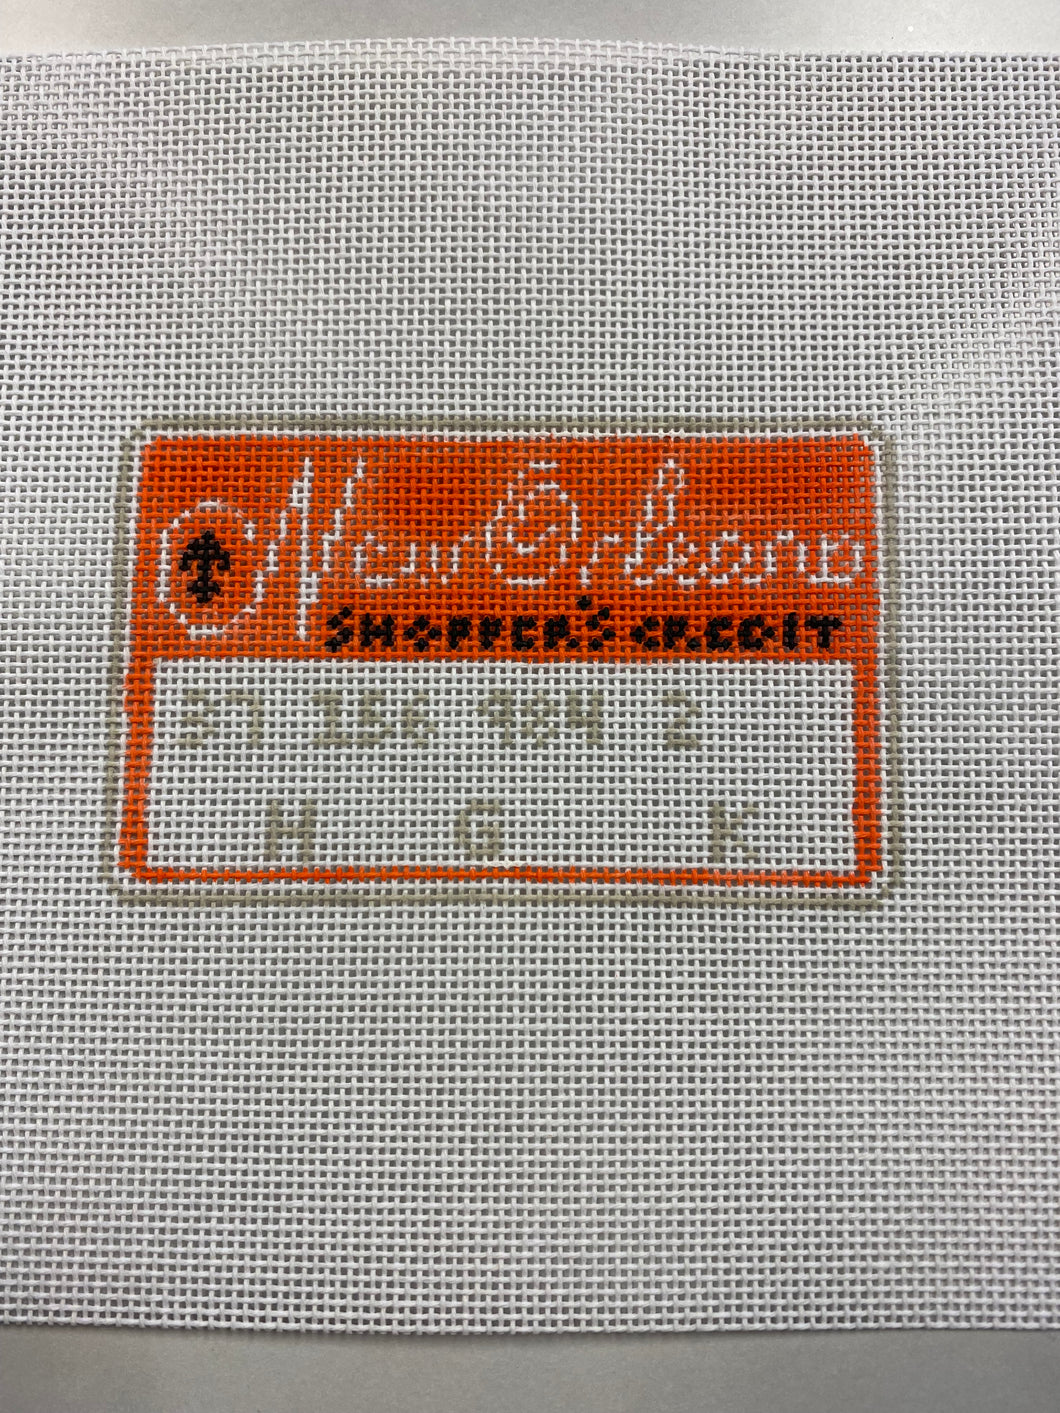 New Orleans Shopper's Card Needlepoint Ornament